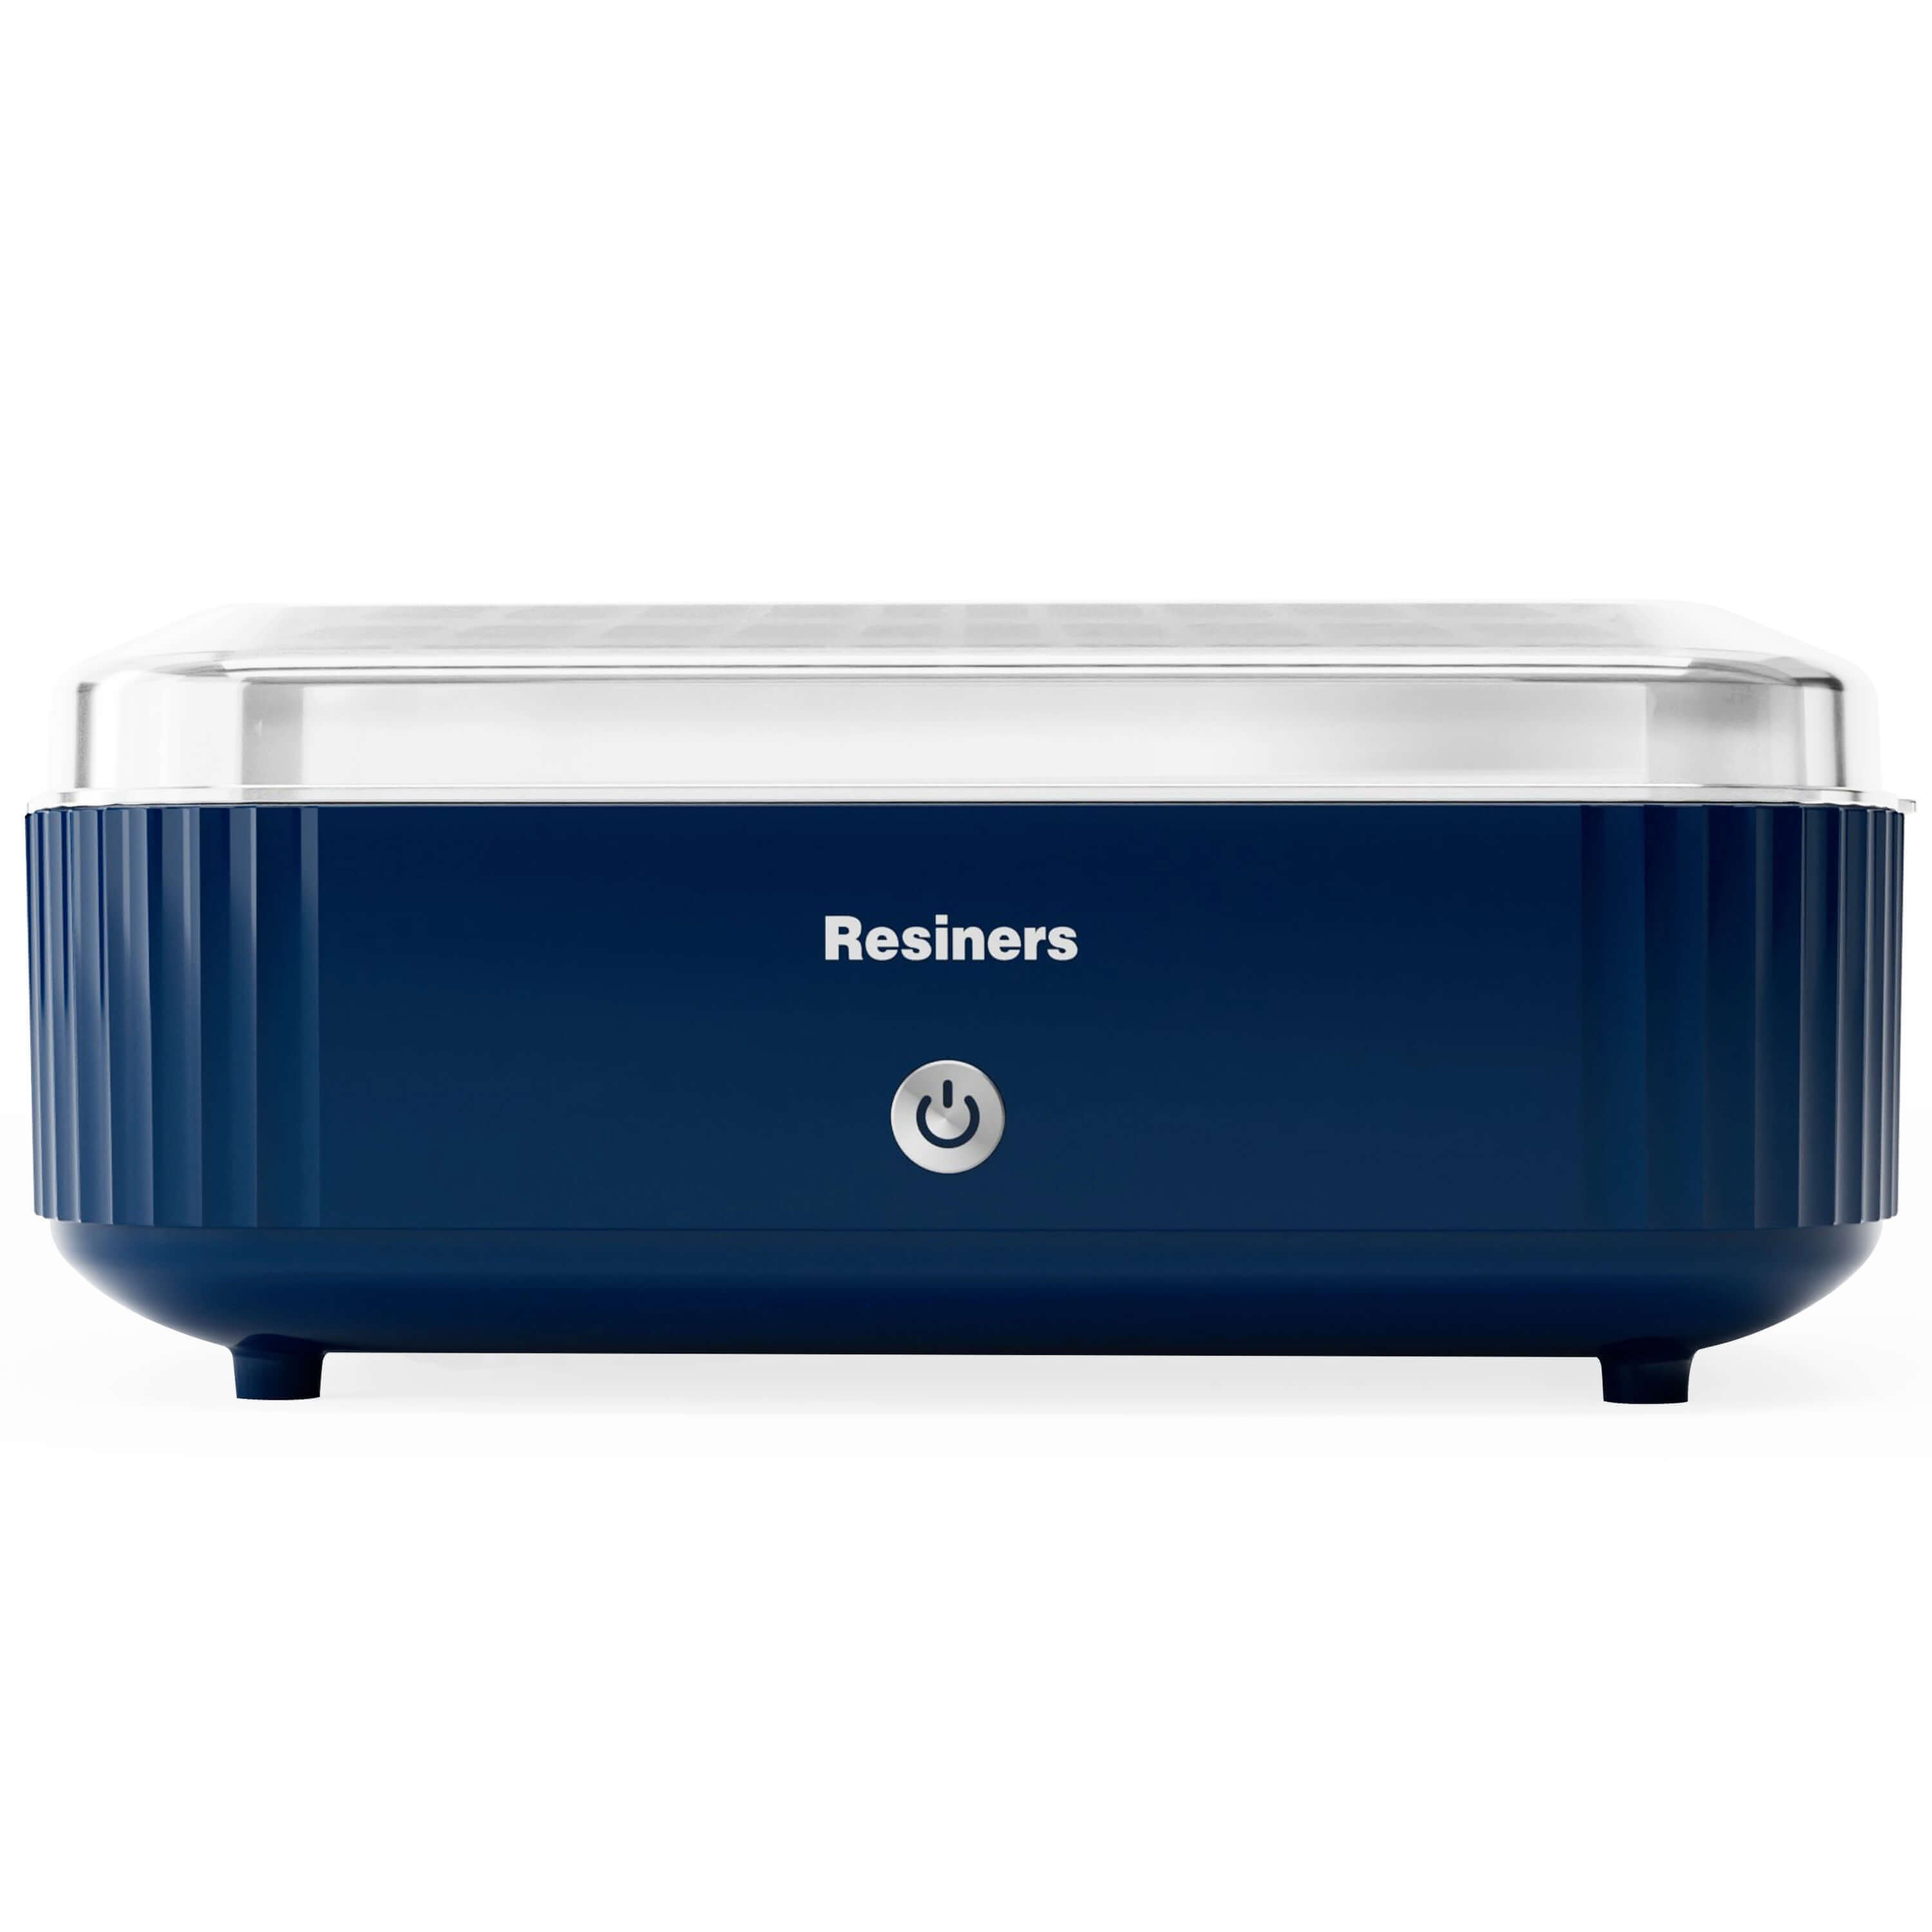 Resiners® Patented Cure Air Resin Curing Machine, Auto Curing 2 Hours Resin  Supplies, Resin Dryer Heater Curing Station for Resin Molds